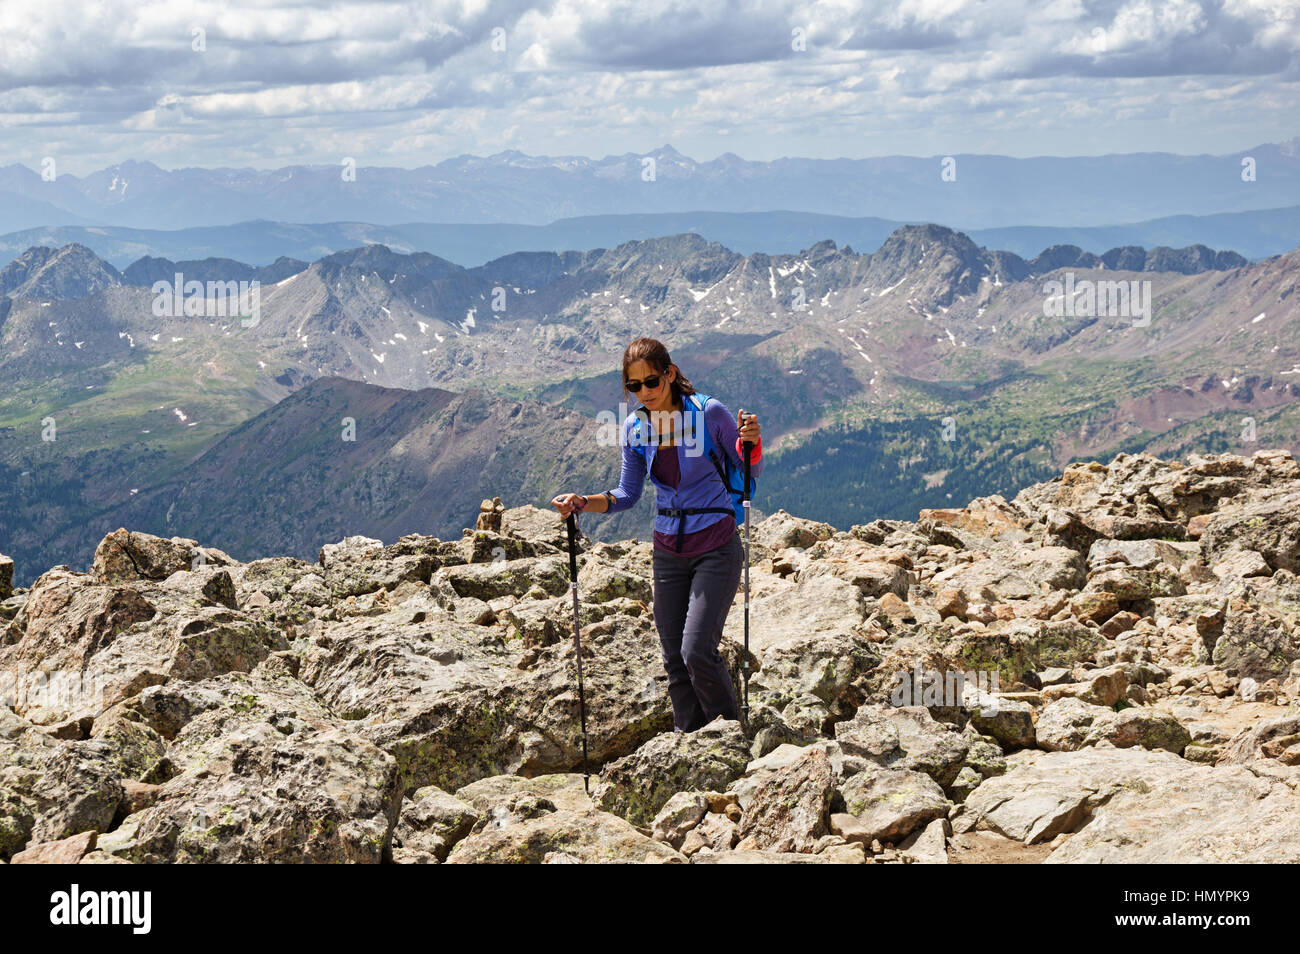 a woman hiker nears the summit of Mount of the Holy Cross in Colorado after a long hike Stock Photo